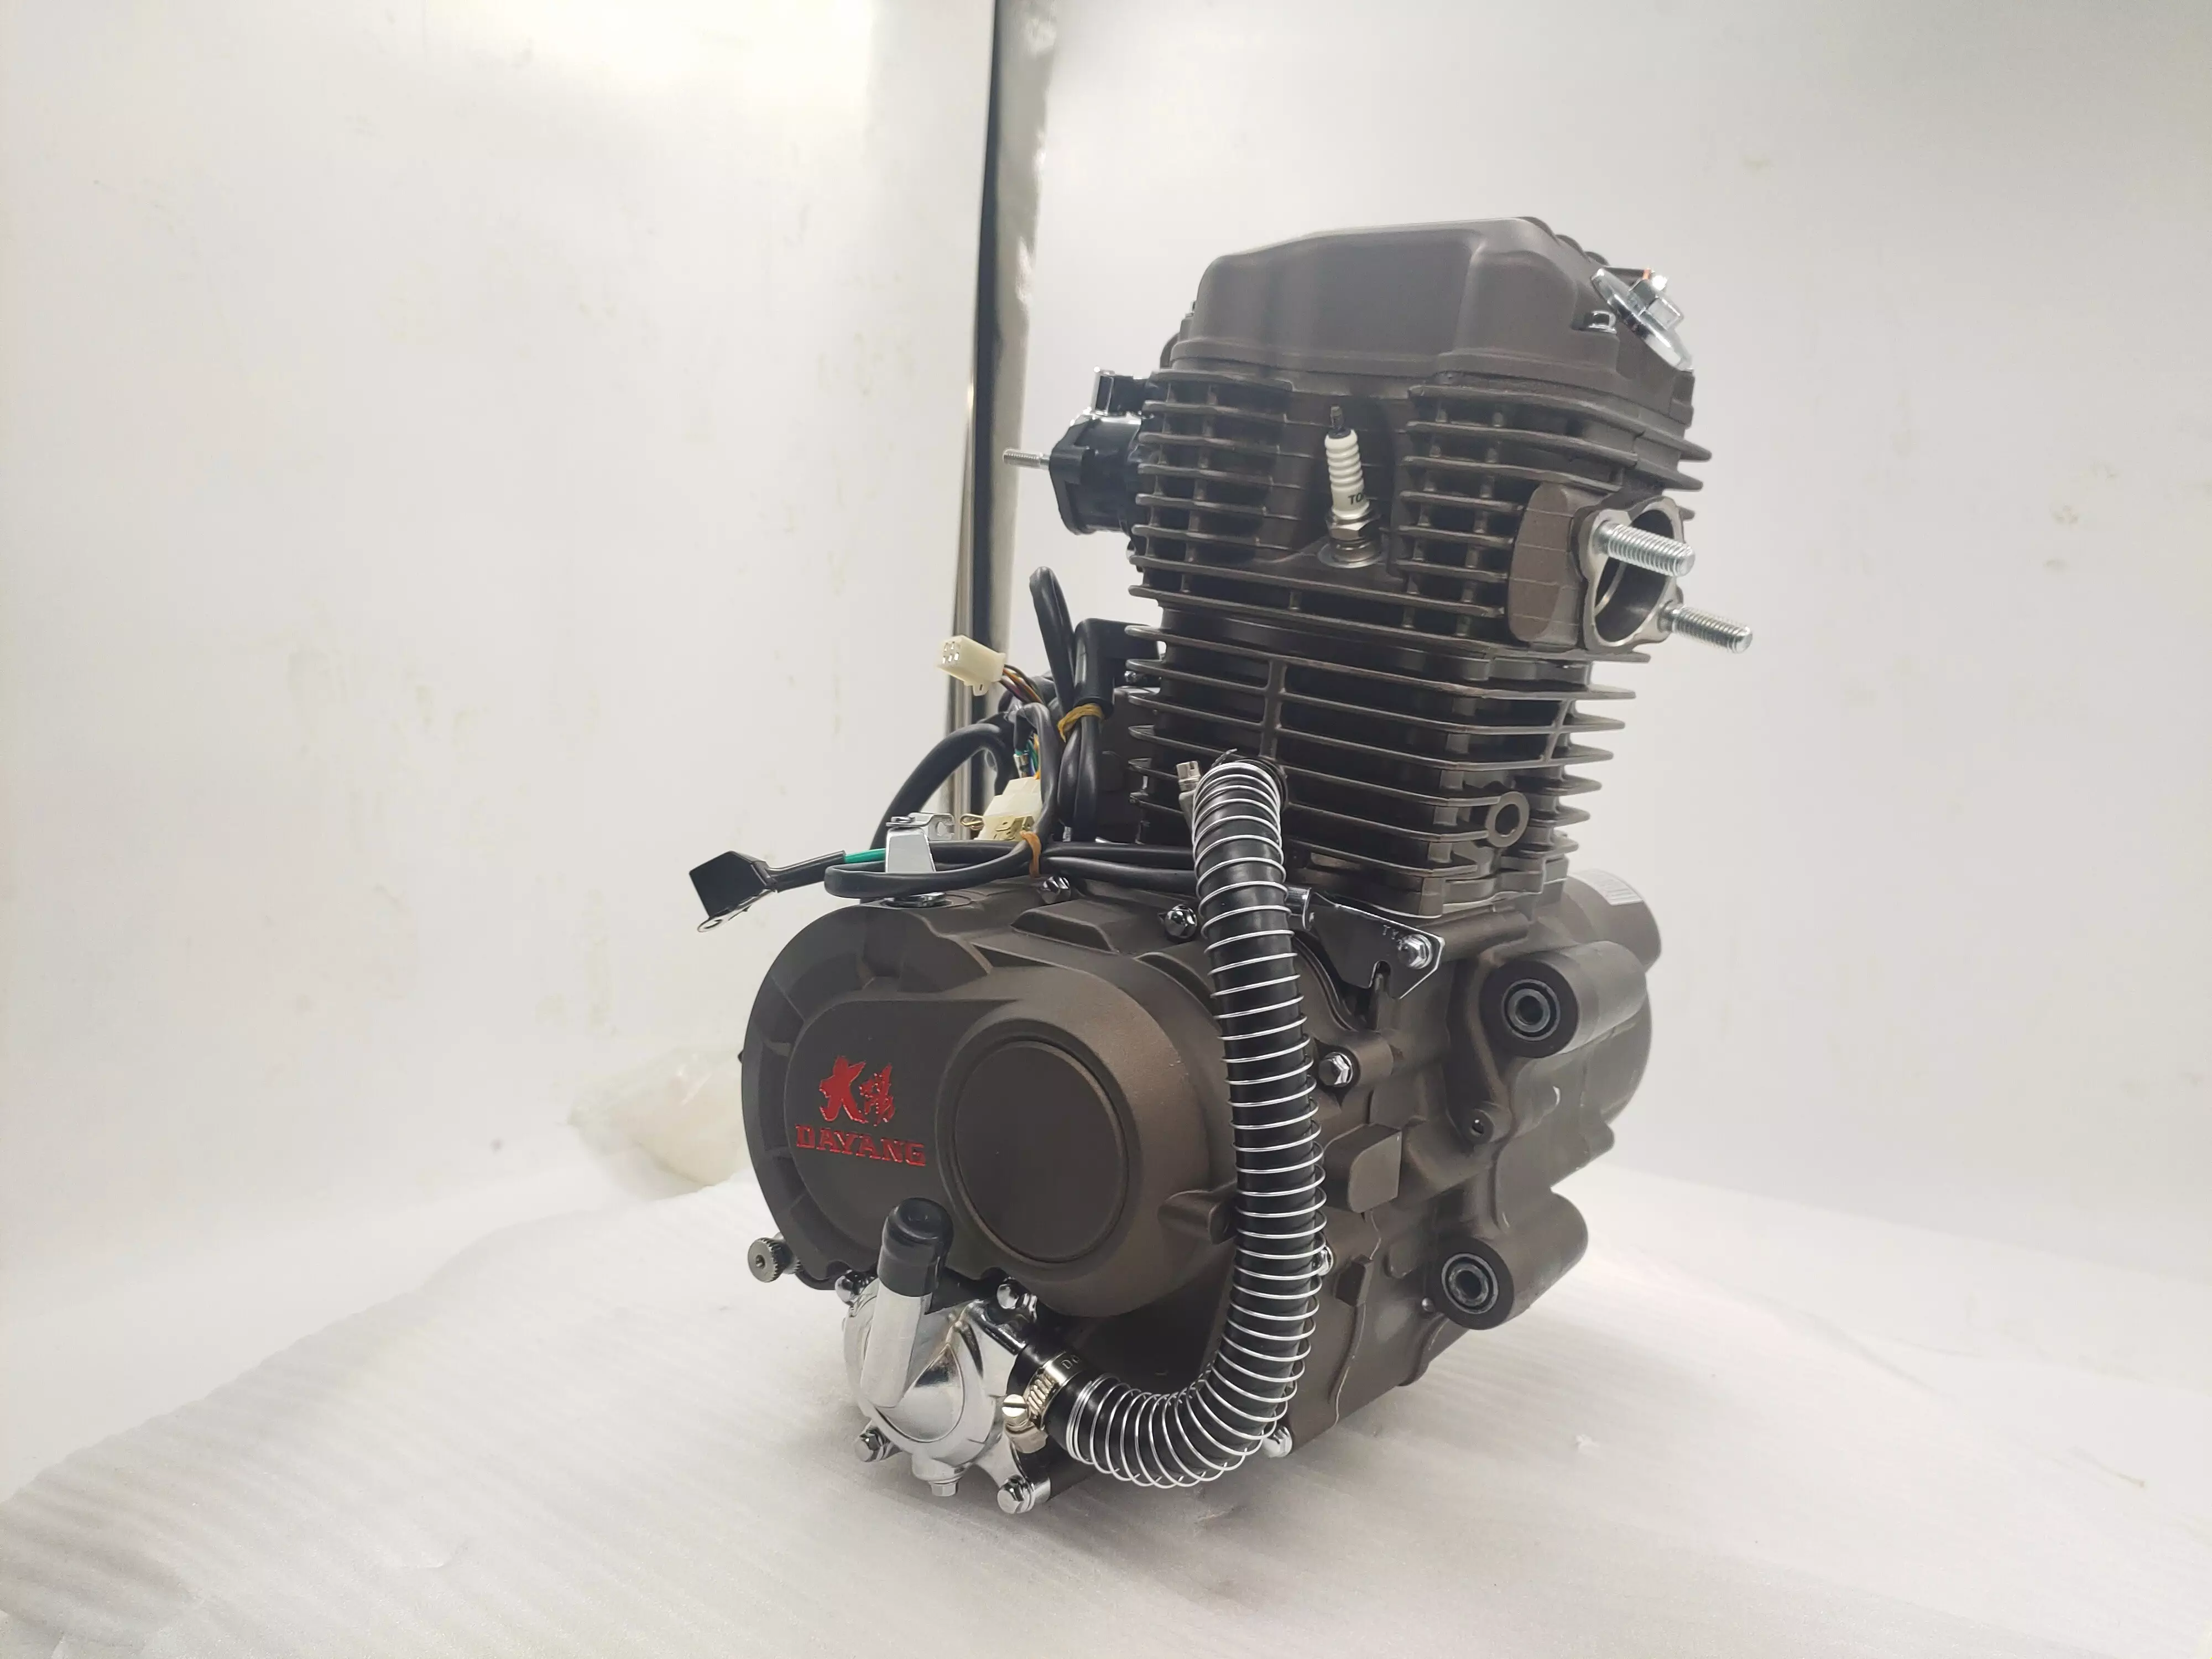 DAYANG 250CC Super Cool Motorcycle Engine Single Cylinder 4 Stroke Style Max Power Origin CCC China Type High Quality